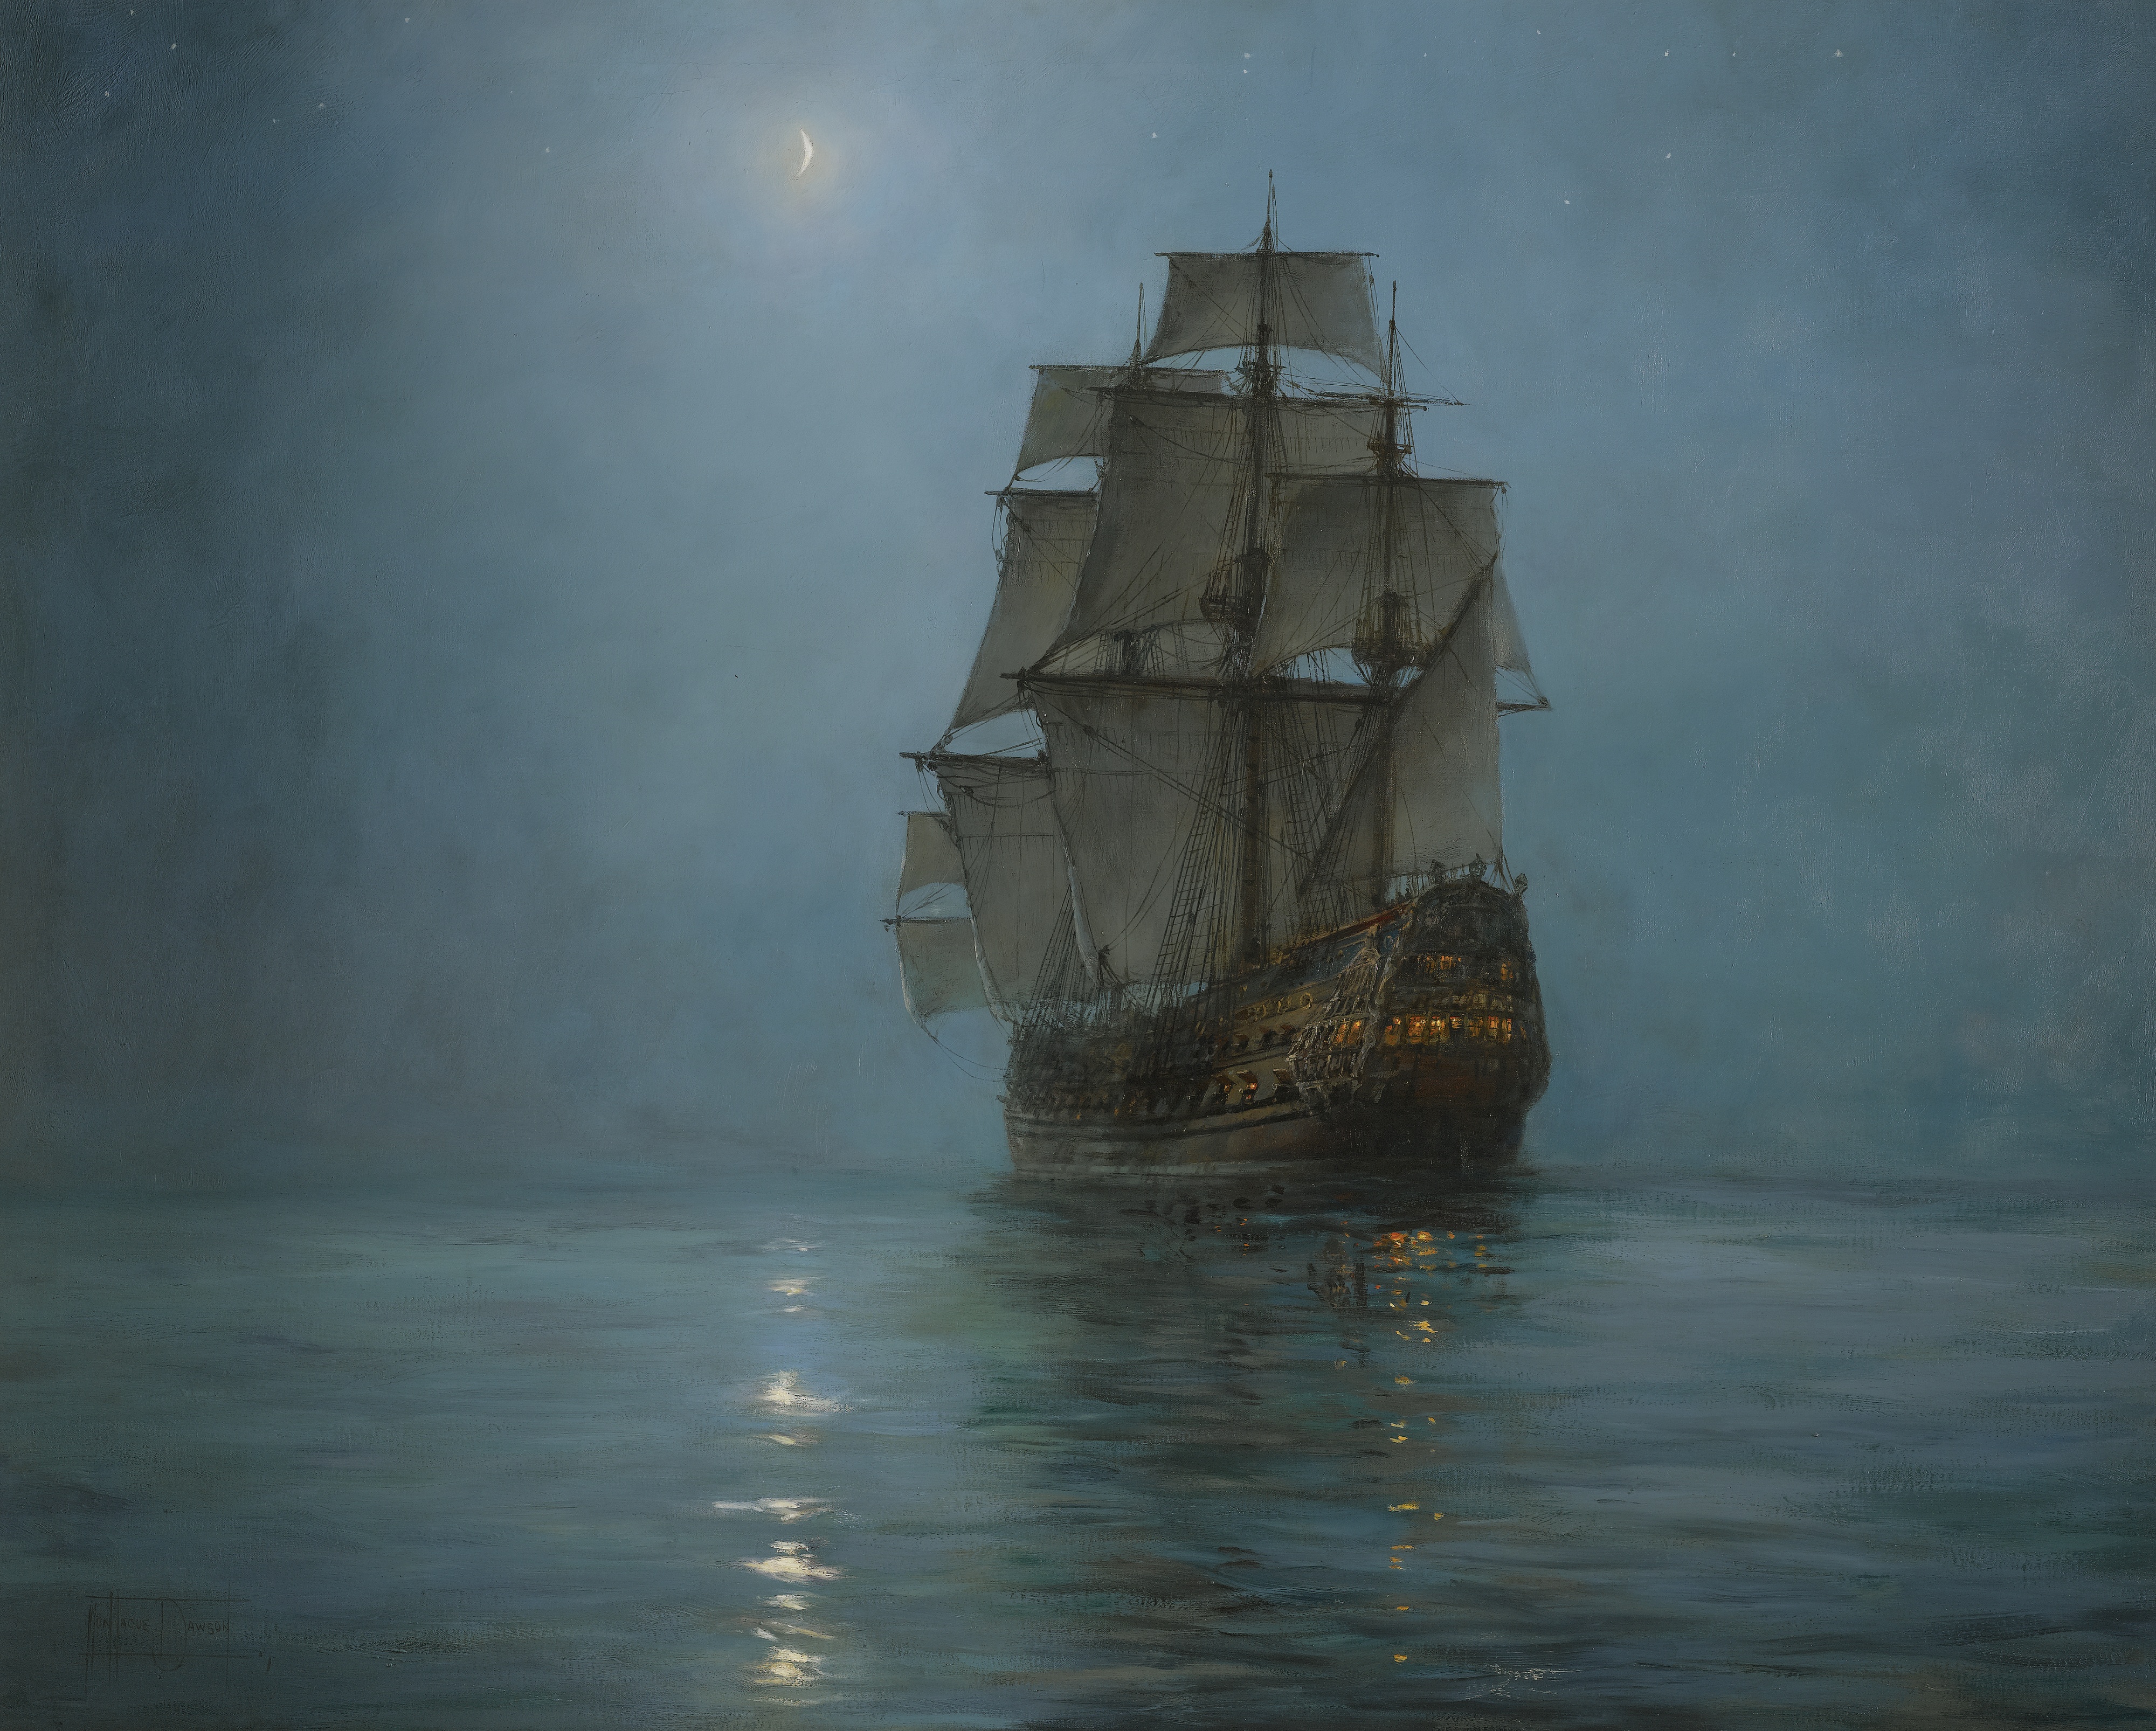 Sailing ship under moon. Painting entitled The Crescent Moon by Montague Dawson